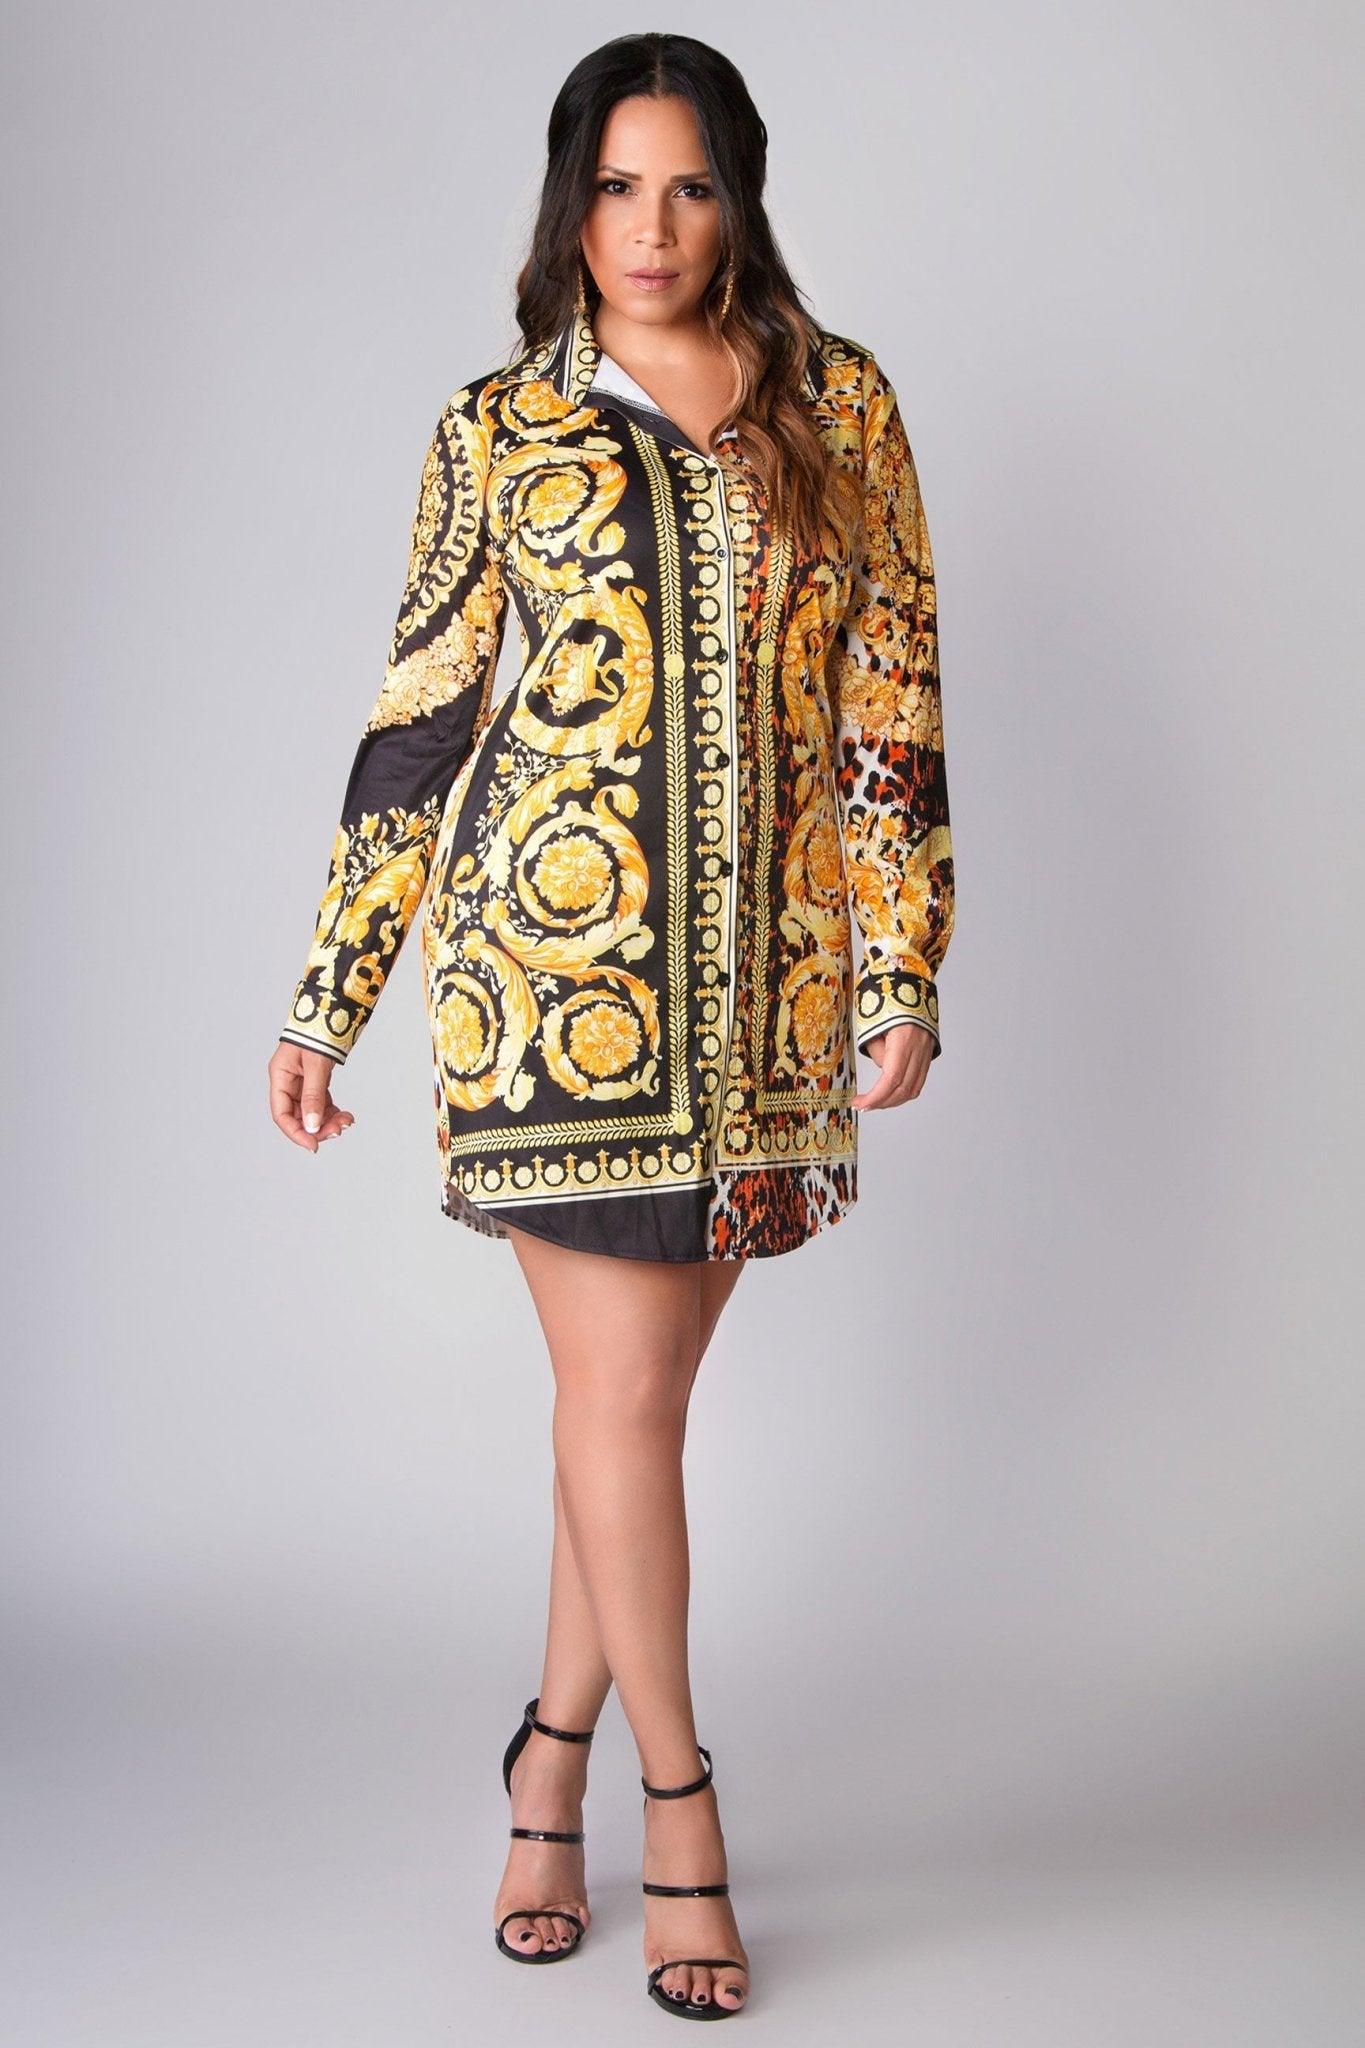 Danna Button Down Long Sleeves Colorful Retro Print Shirt Dress - MY SEXY STYLES